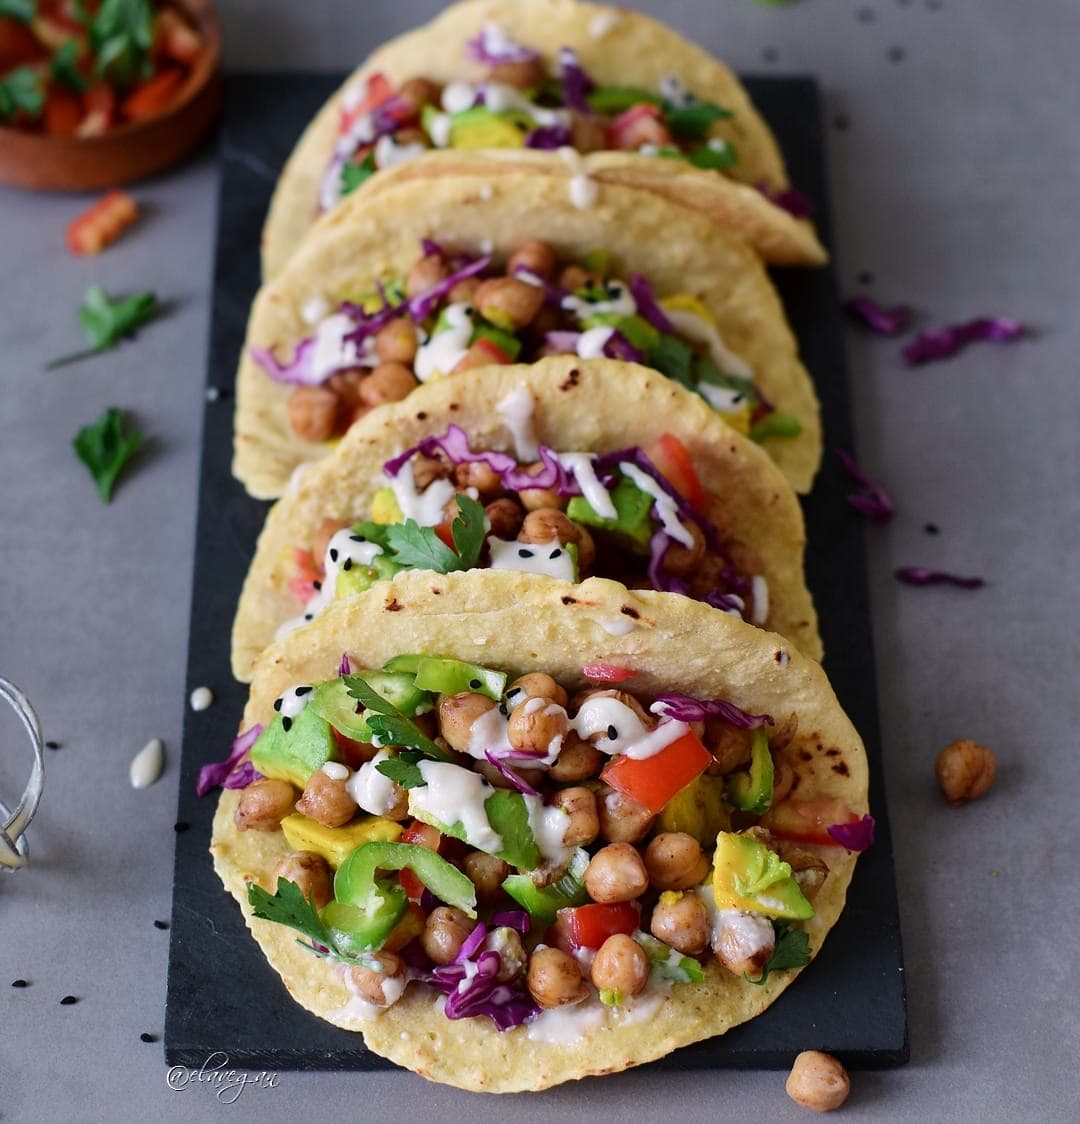 Vegan chickpea tacos recipe with avocado and a tahini dressing. These vegan tacos are gluten-free, healthy, easy to make, and delicious. Homemade tortillas recipe included